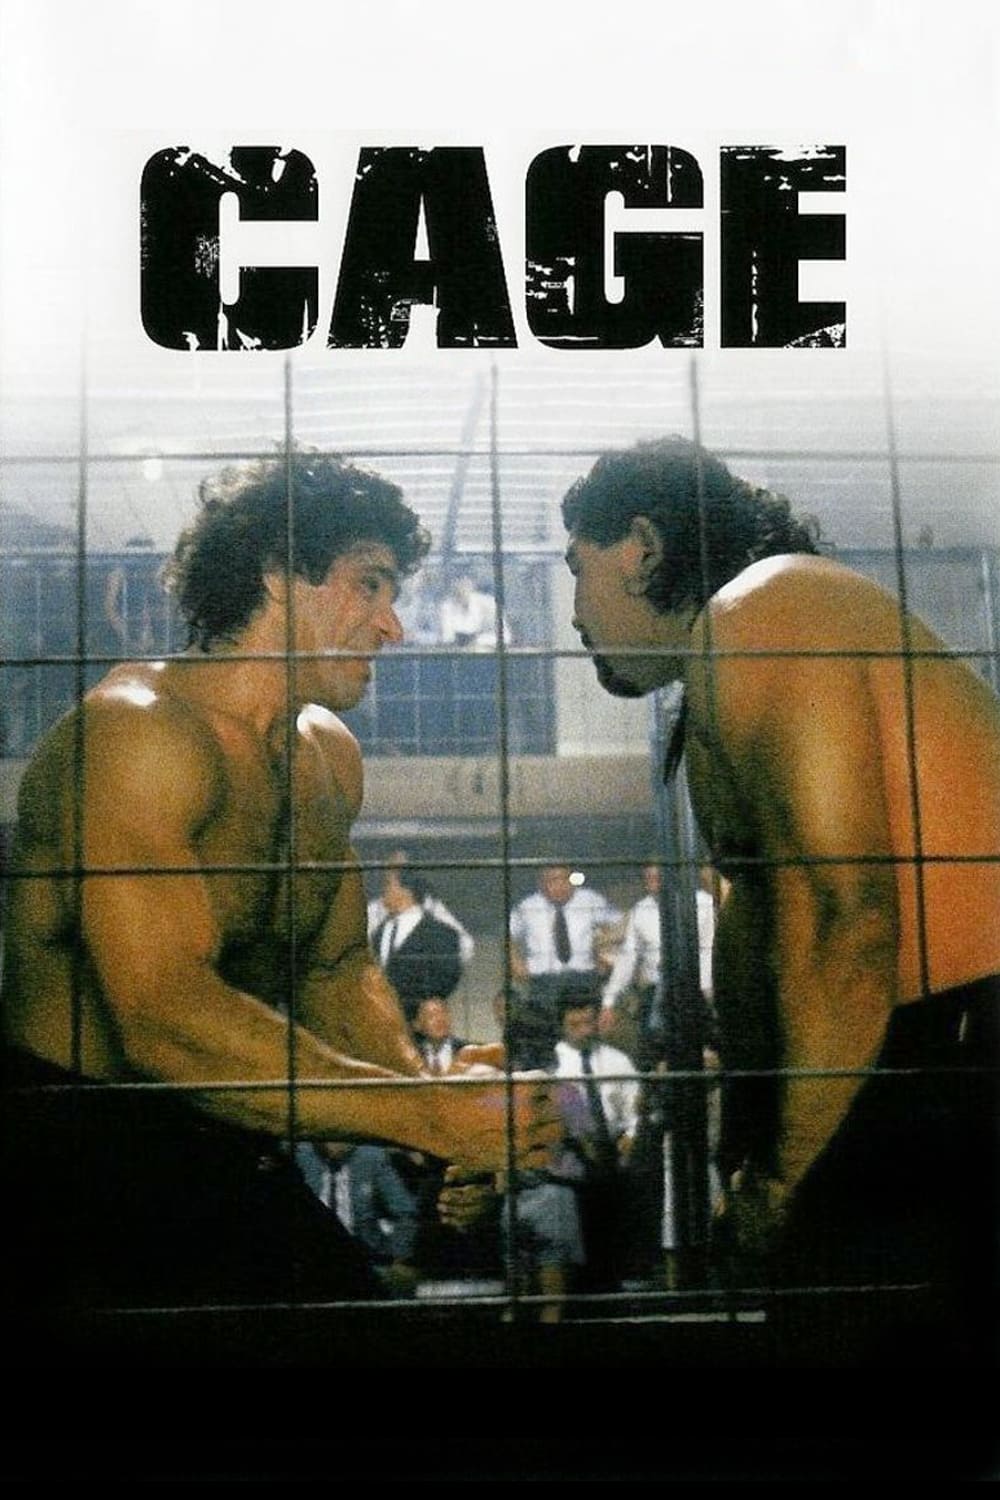 Cage (1989)